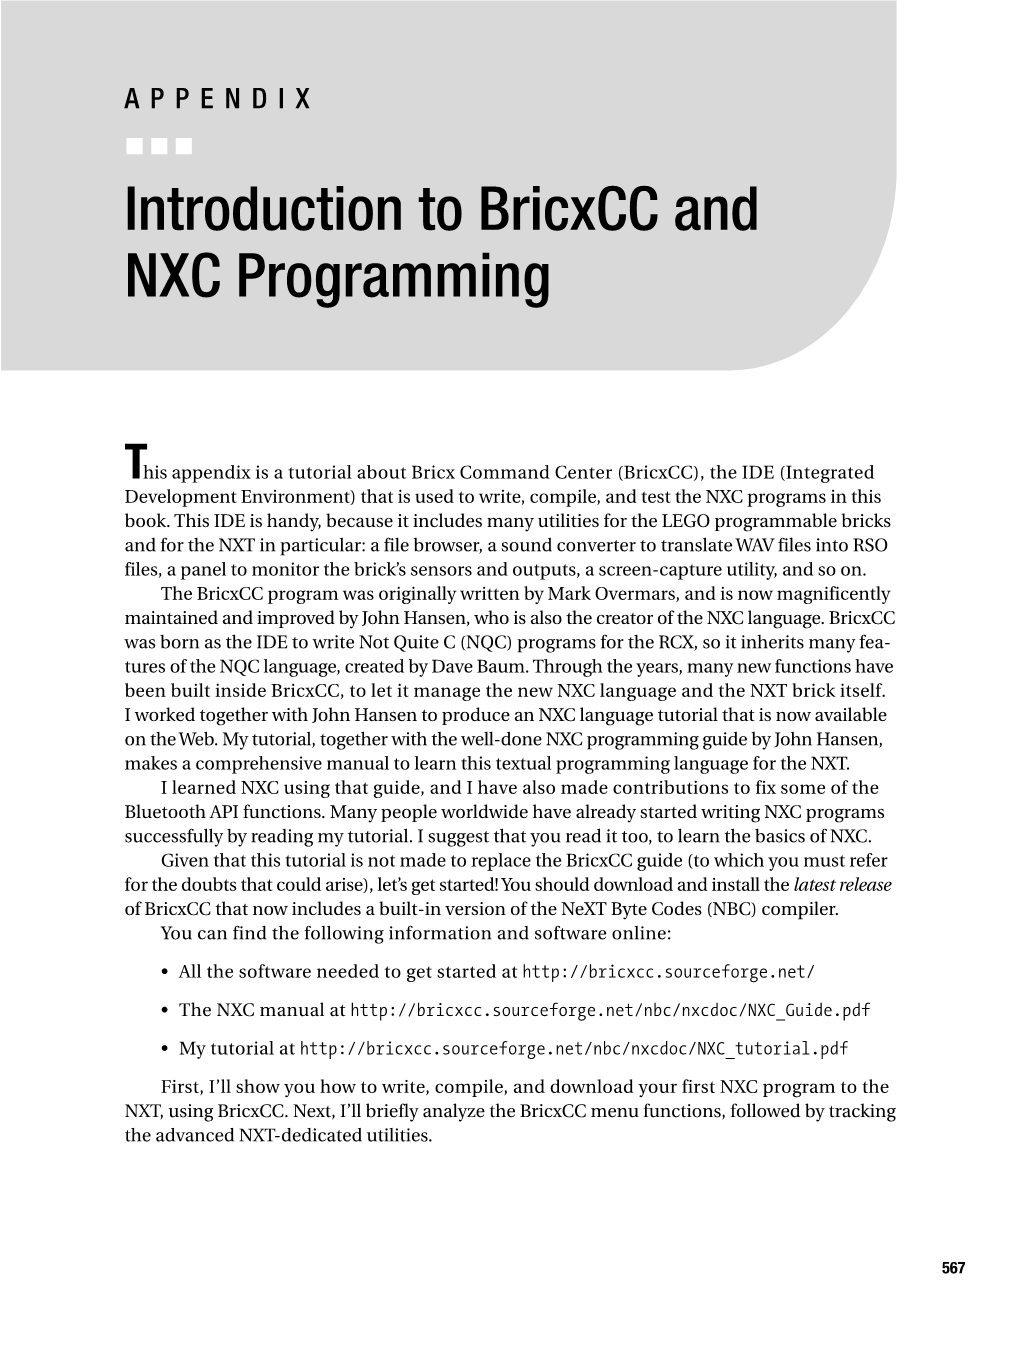 Introduction to Bricxcc and NXC Programming